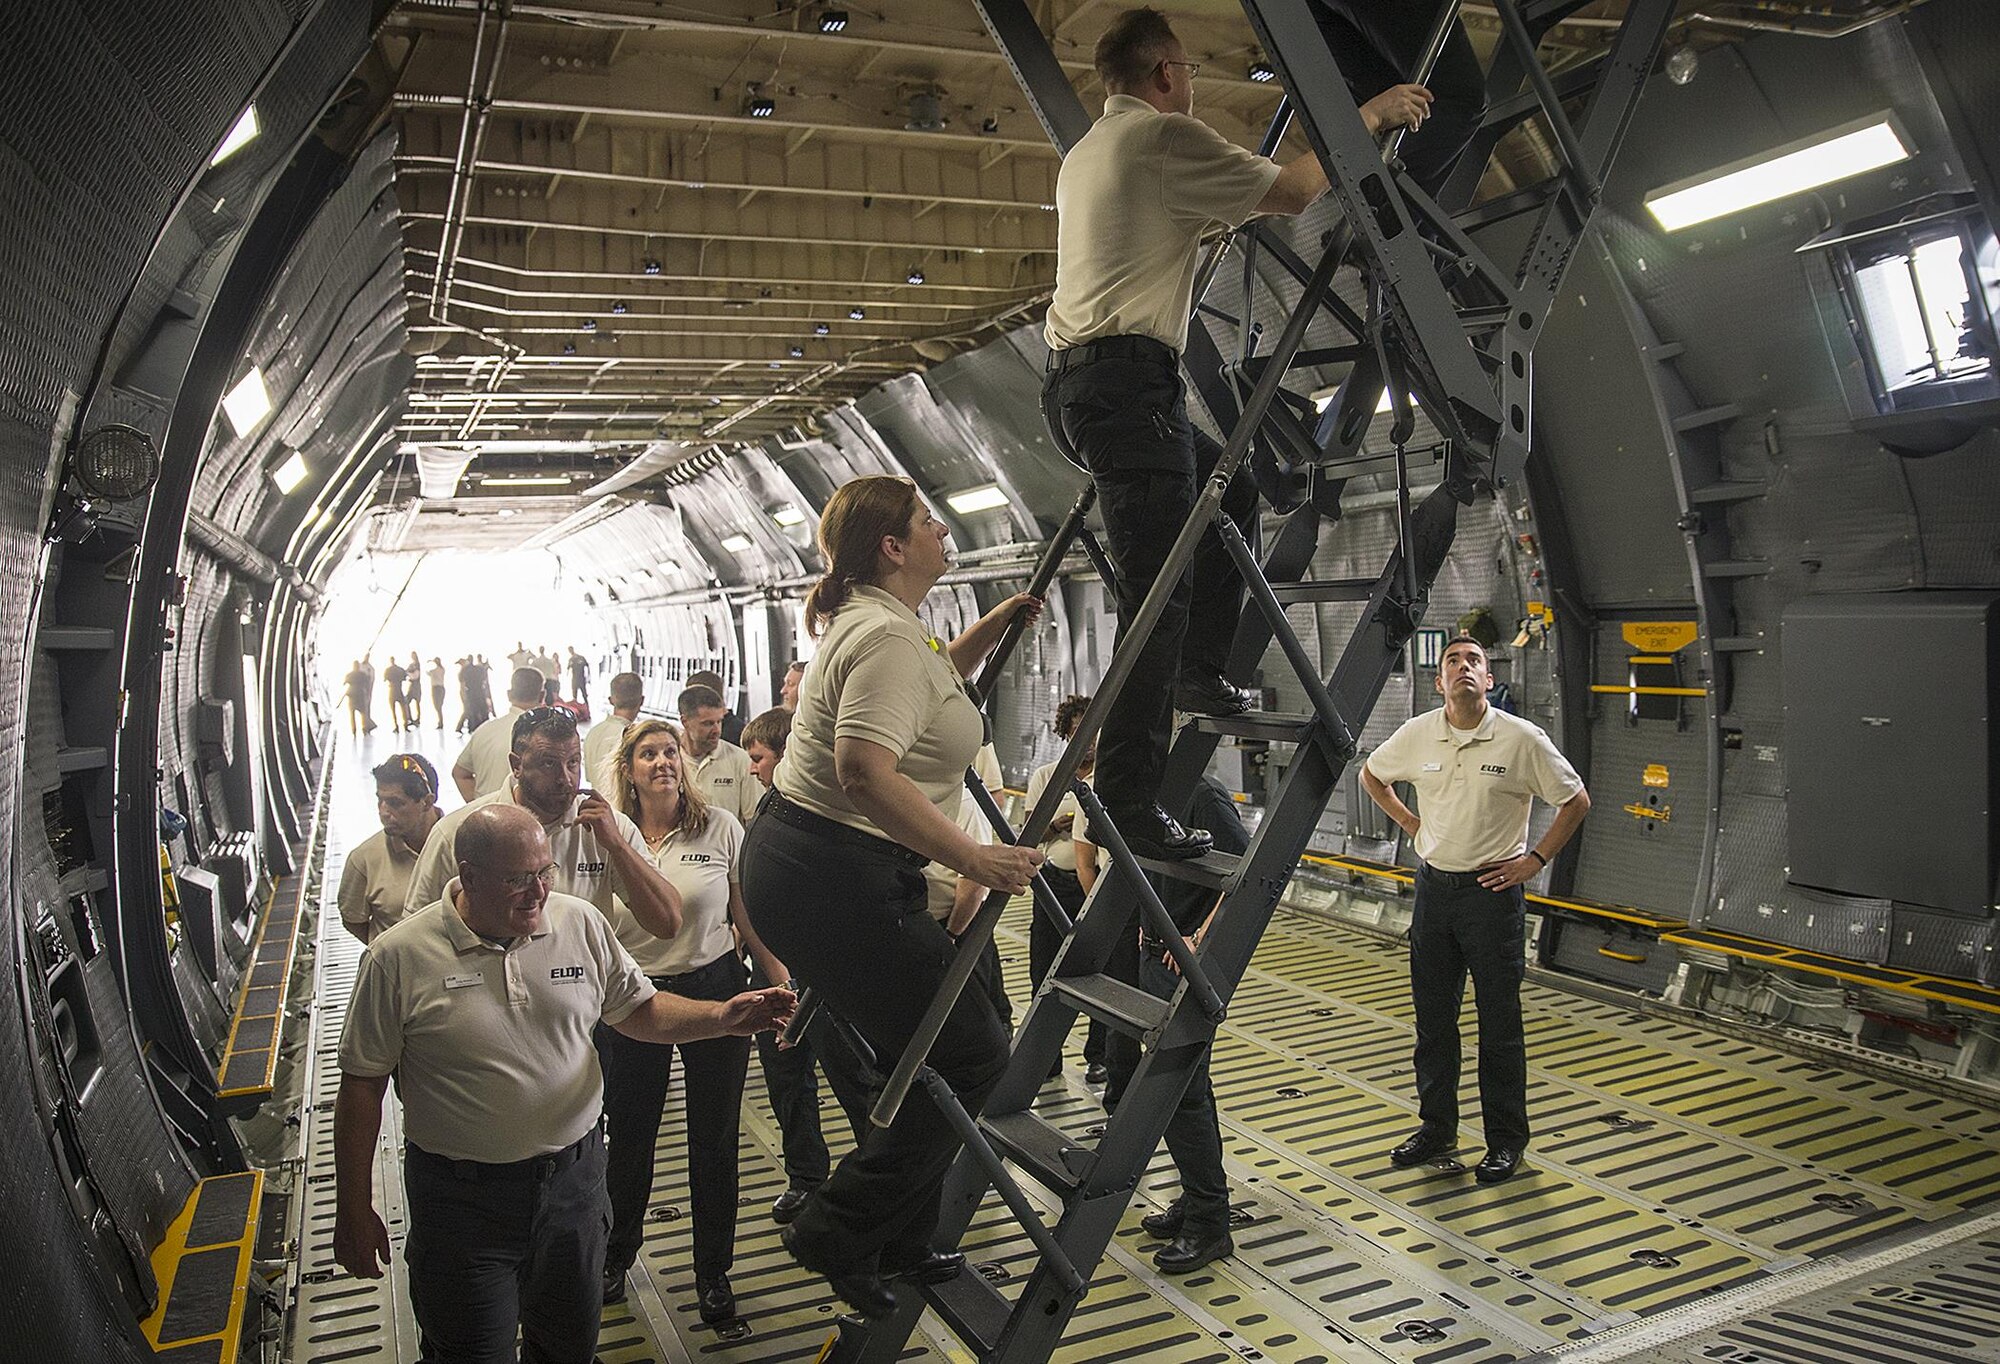 Members of the Department of Defense Executive Leadership Development Program tour the troop compartment of a C-5M Super Galaxy aircraft May 10, 2017 at Joint Base San Antonio-Lackland, Texas. (U.S. Air Force photo by Benjamin Faske)